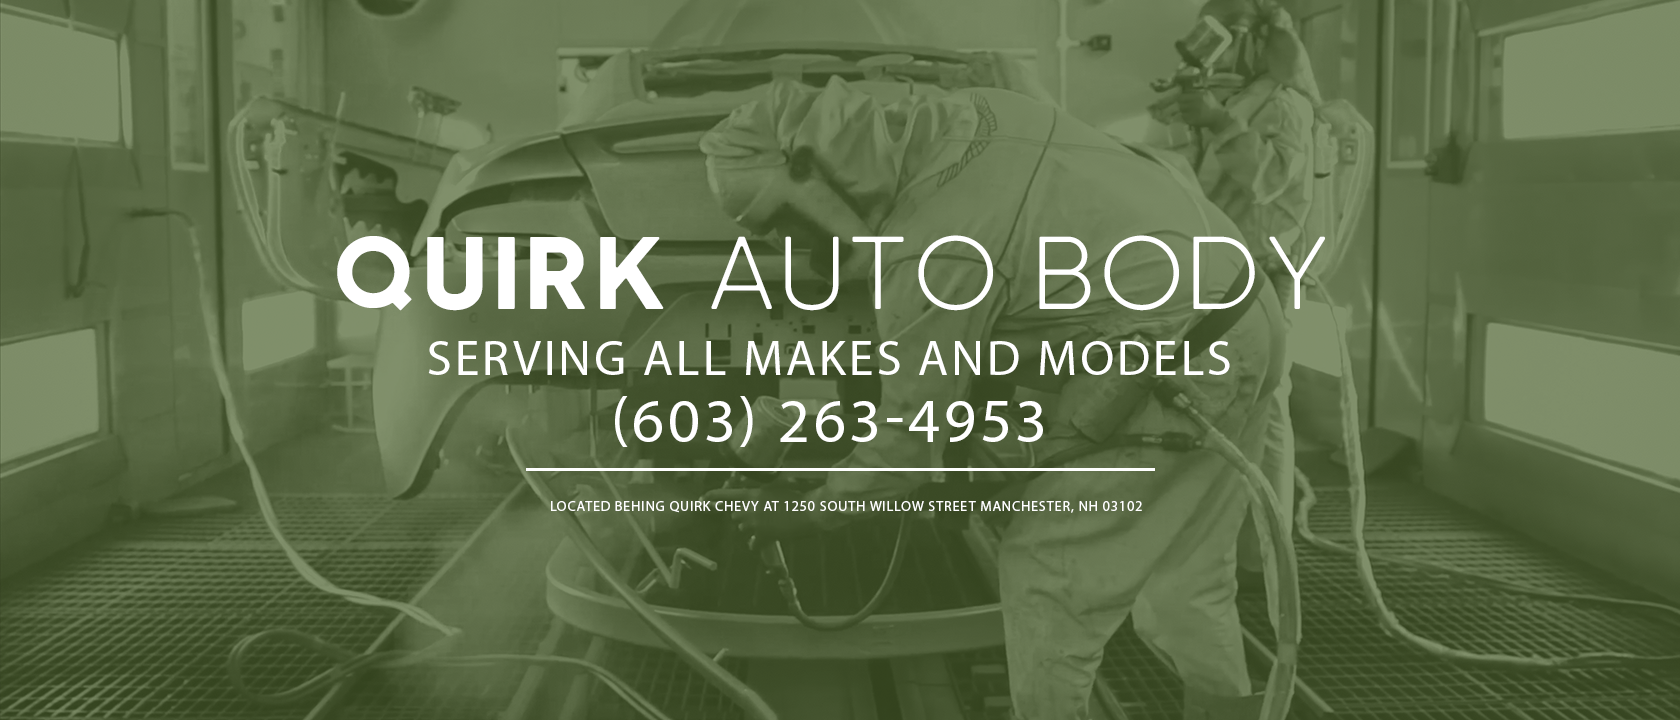 Quirk Auto Body | Manchester, NH